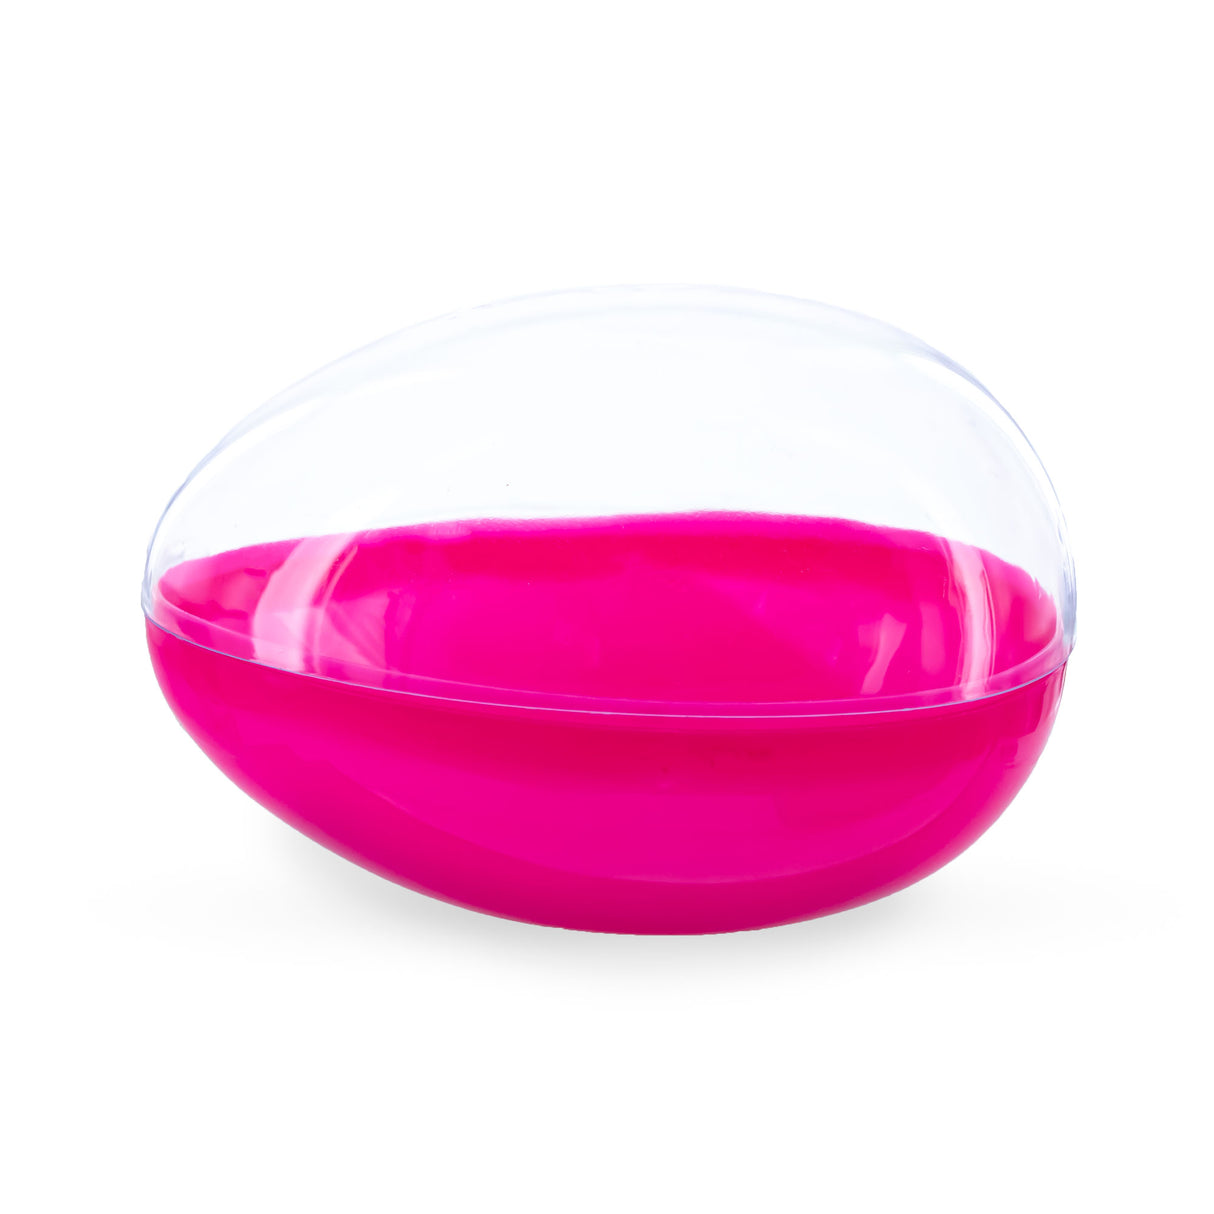 Large Fillable Clear Top Pink Bottom Plastic Easter Egg 5.1 Inches in Pink color, Oval shape